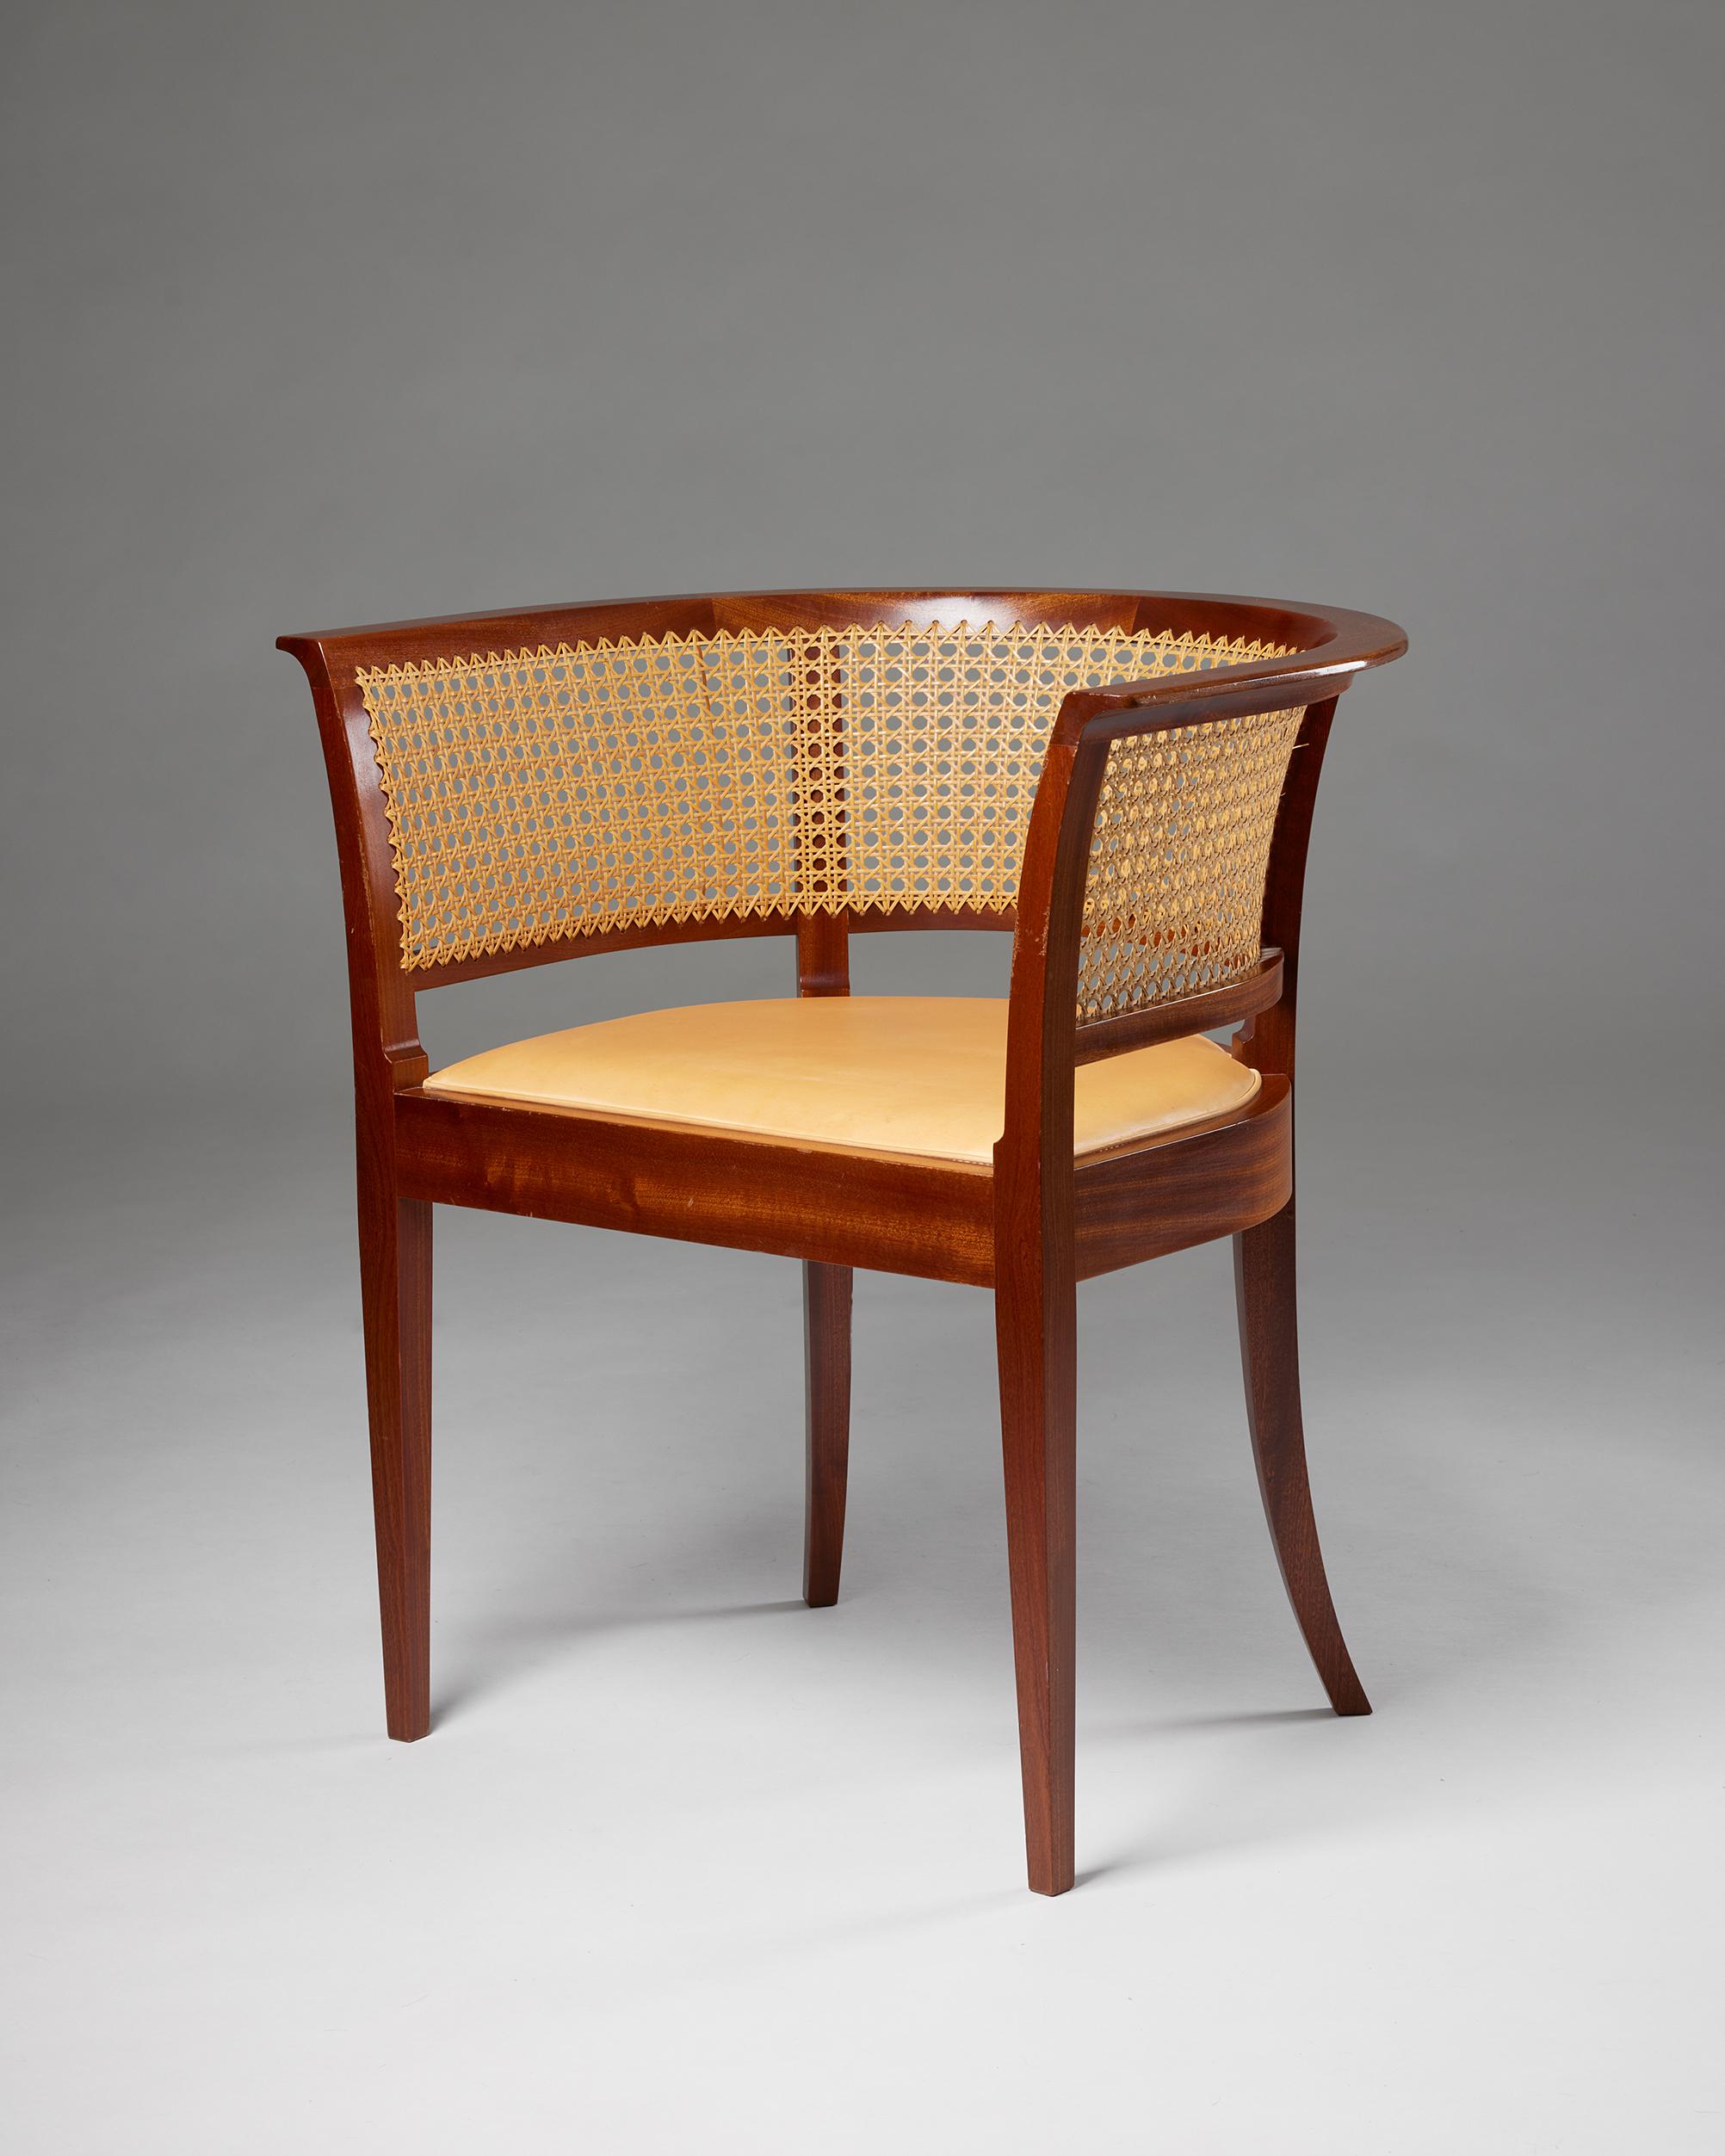 ‘The Faaborg Chair’ designed by Kaare Klint for Rud. Rasmussen Cabinetmakers
Denmark, 1914.
Mahogany, woven cane and leather.

Designed in 1914 for the Faaborg Museum. This example was made in the 1960s.

H: 73 cm
W: 69 cm
D: 54 cm
Seat H: 45